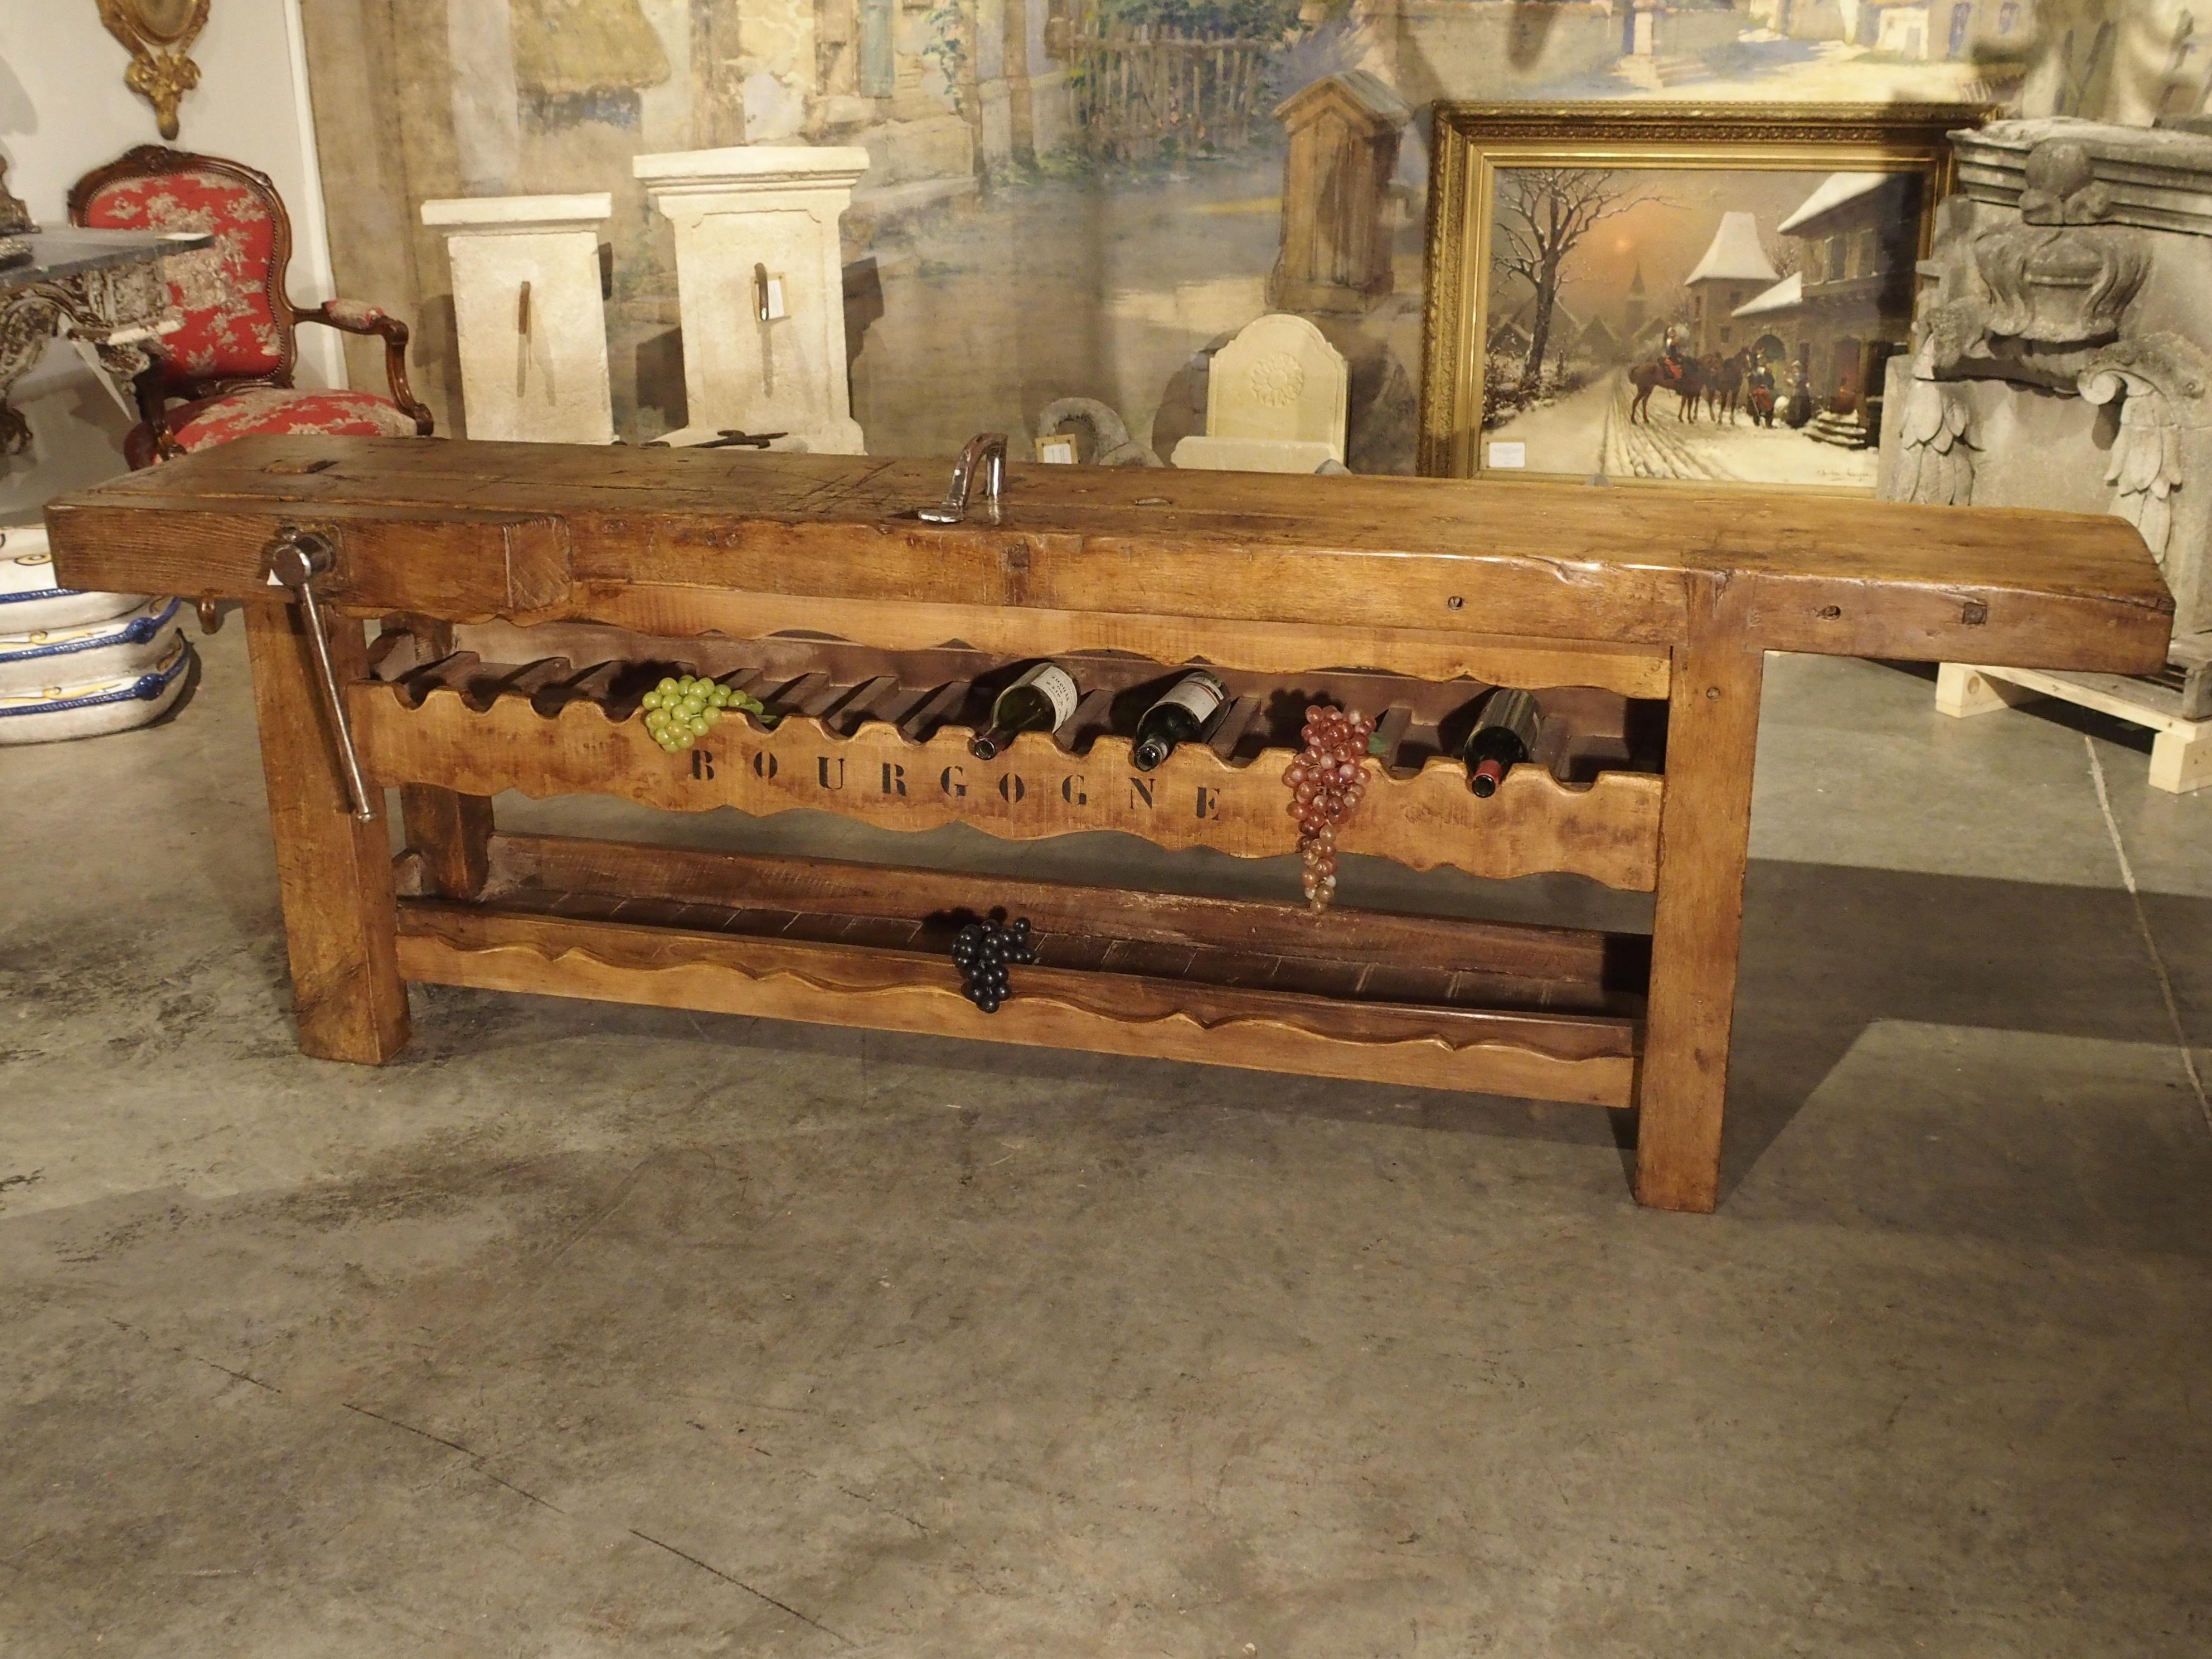 From France, this charming antique workbench has been converted into a large wine bottle holder. The workbench top still has its vise on the left front. There are 16 hand-carved wooden bottle holders on the first rack, with Bourgogne painted in